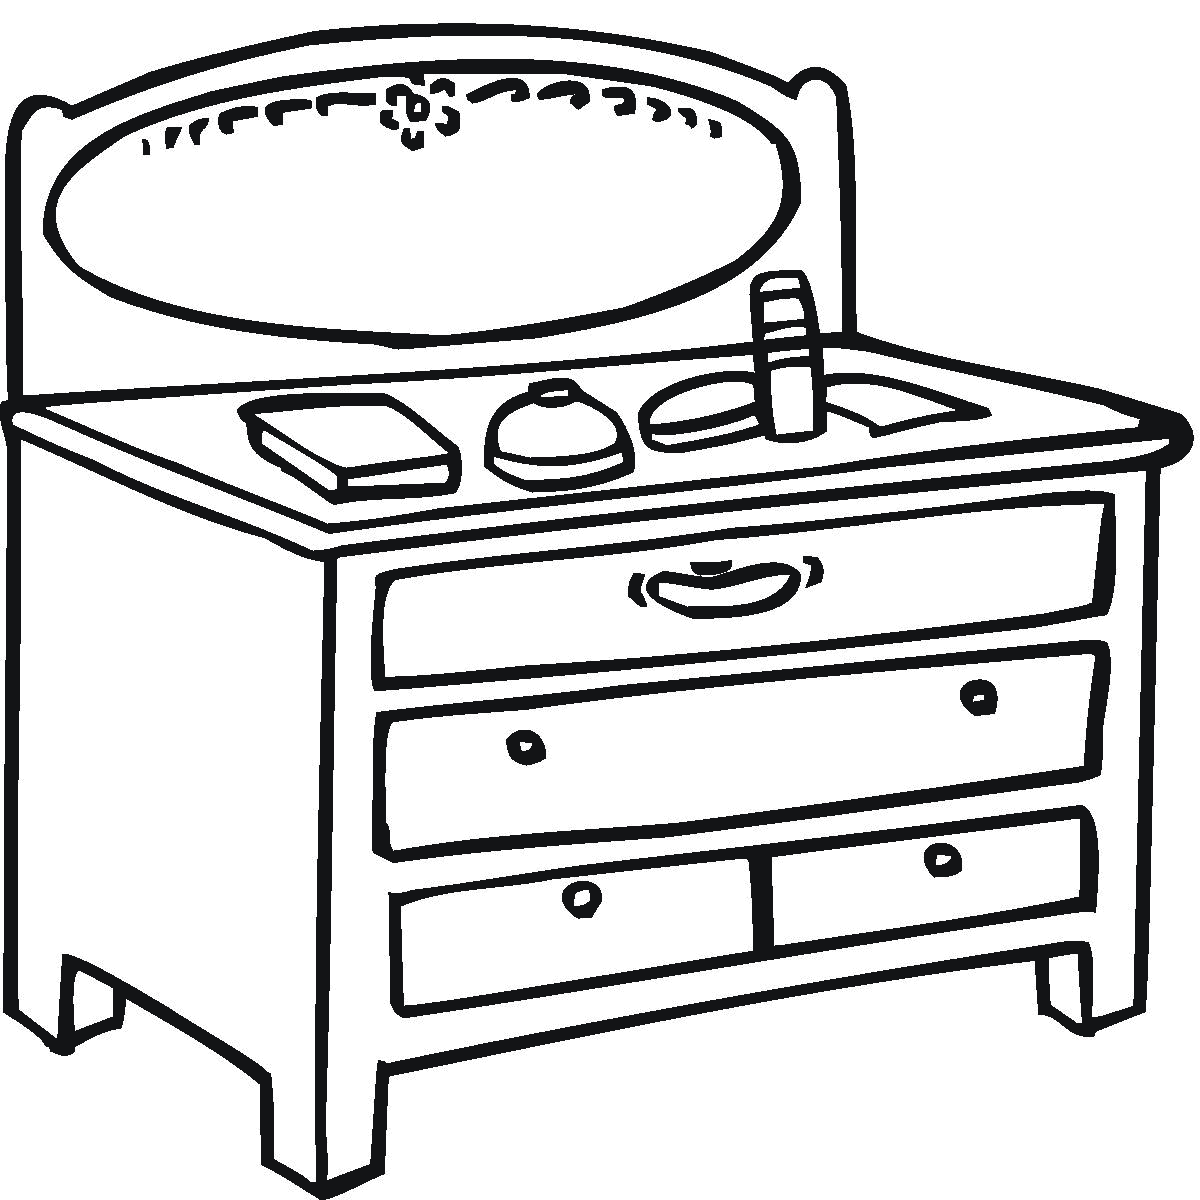 Furniture coloring page for kids to print and download for free